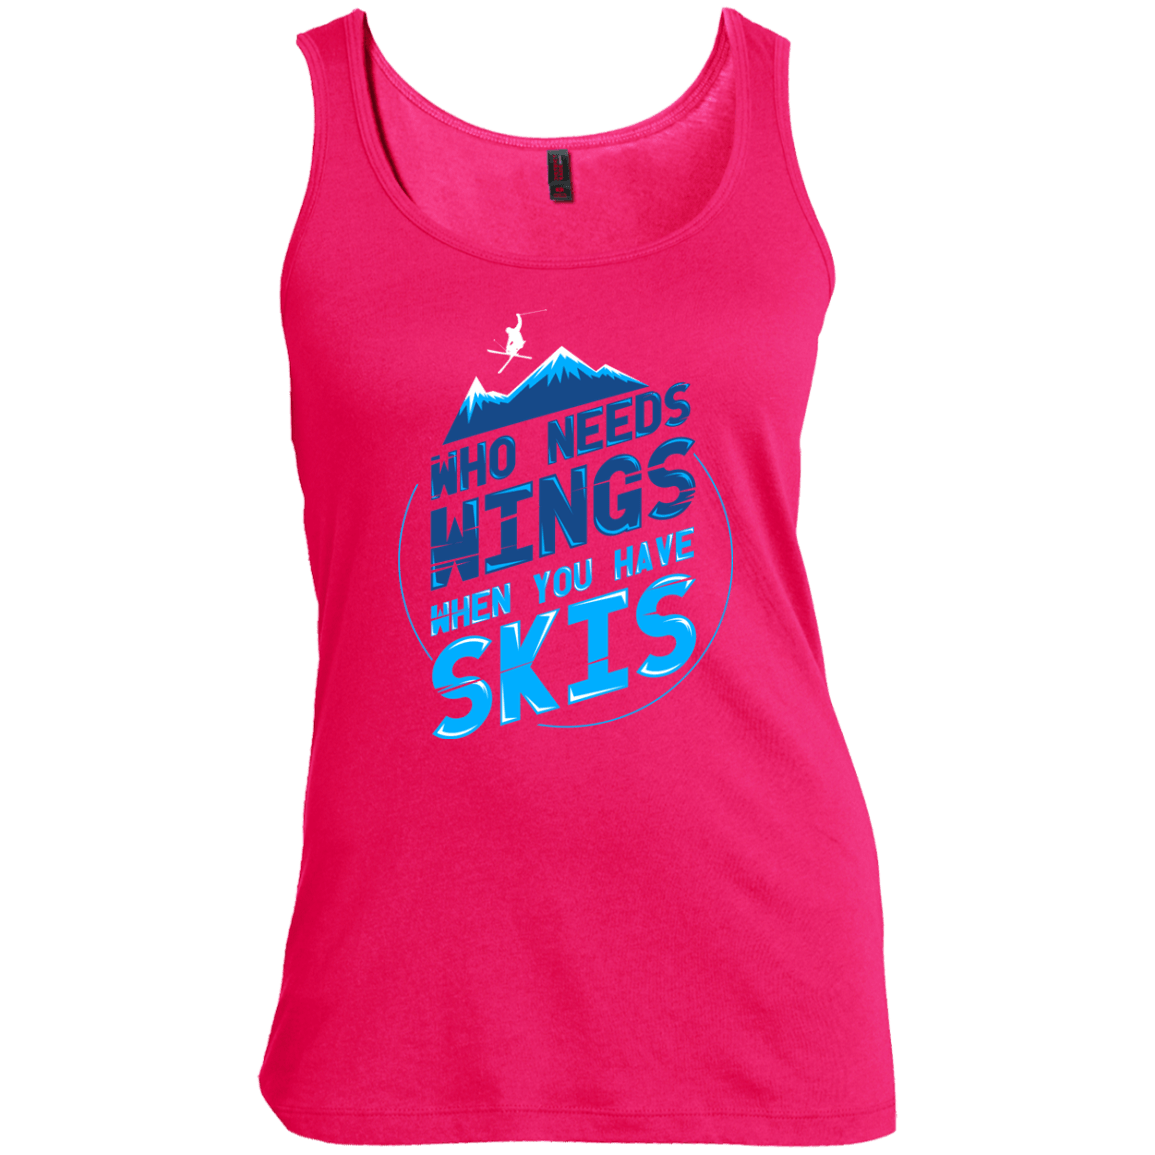 Who Needs Wings When You Have Skis Tank Tops - Powderaddicts